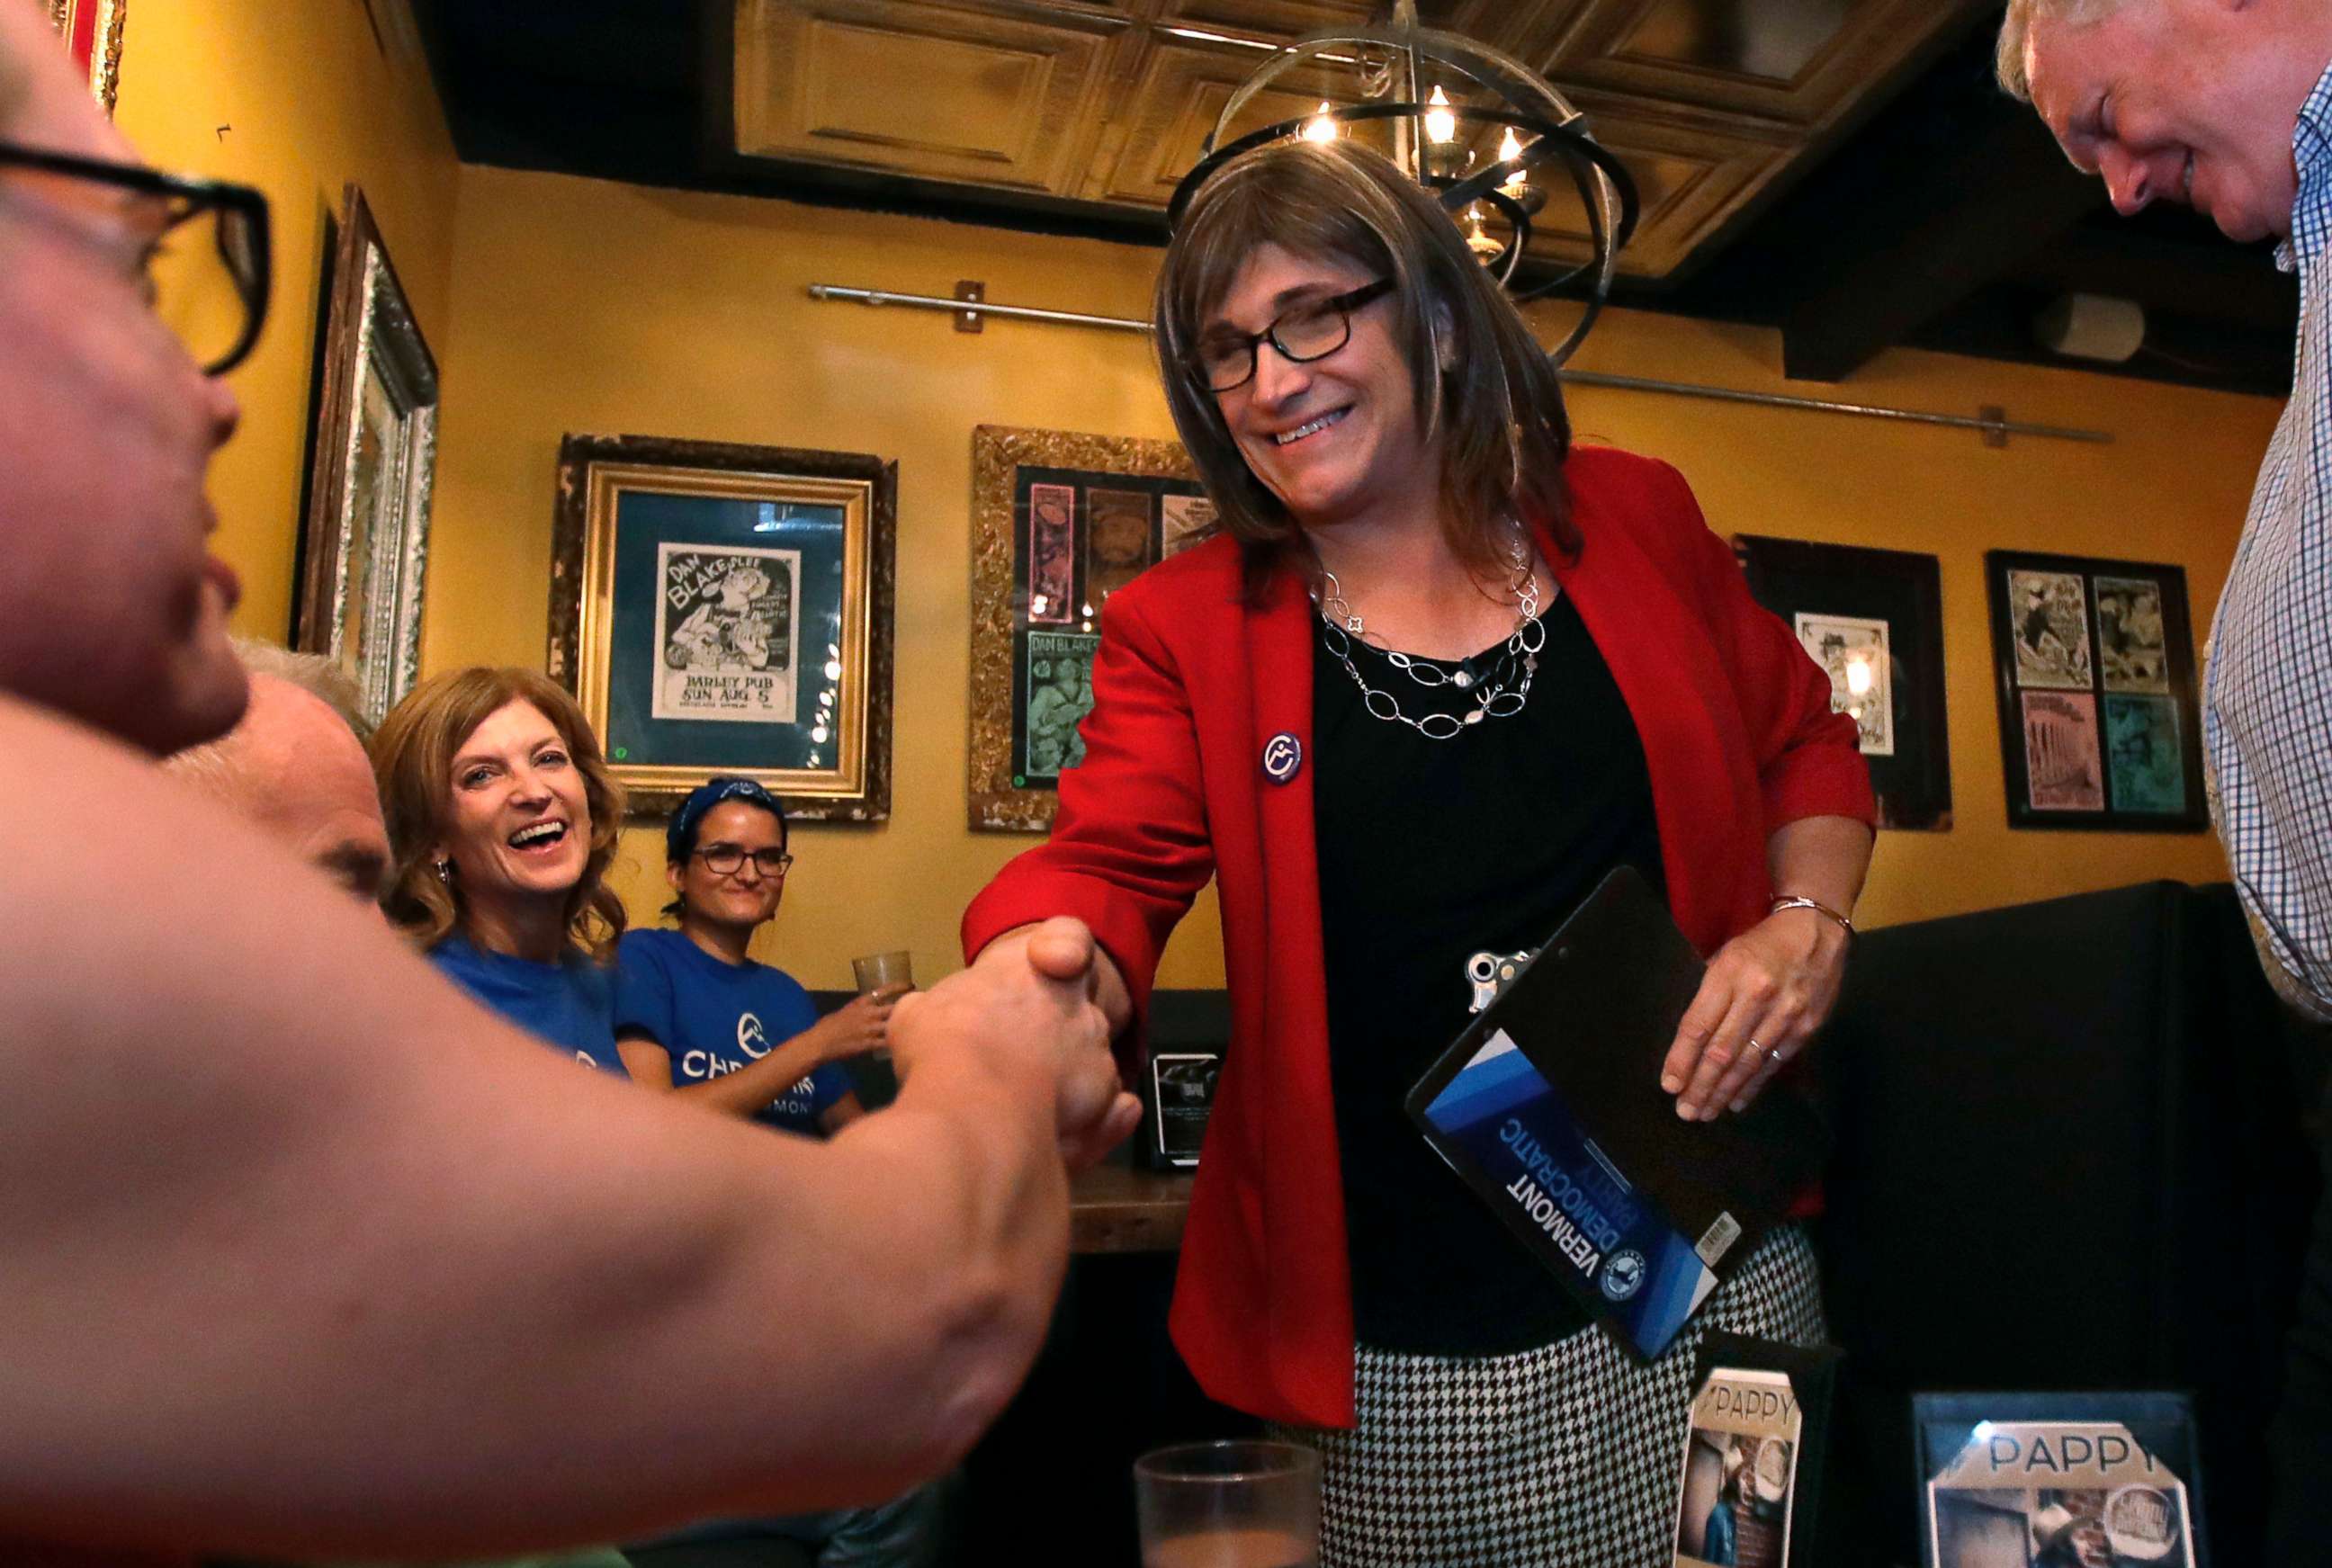 PHOTO: Vermont Democratic gubernatorial candidate Christine Hallquist, holding clipboard, a transgender woman and former electric company executive, shakes hands with her supporters during her election night party in Burlington, Vt., on Aug. 14, 2018.